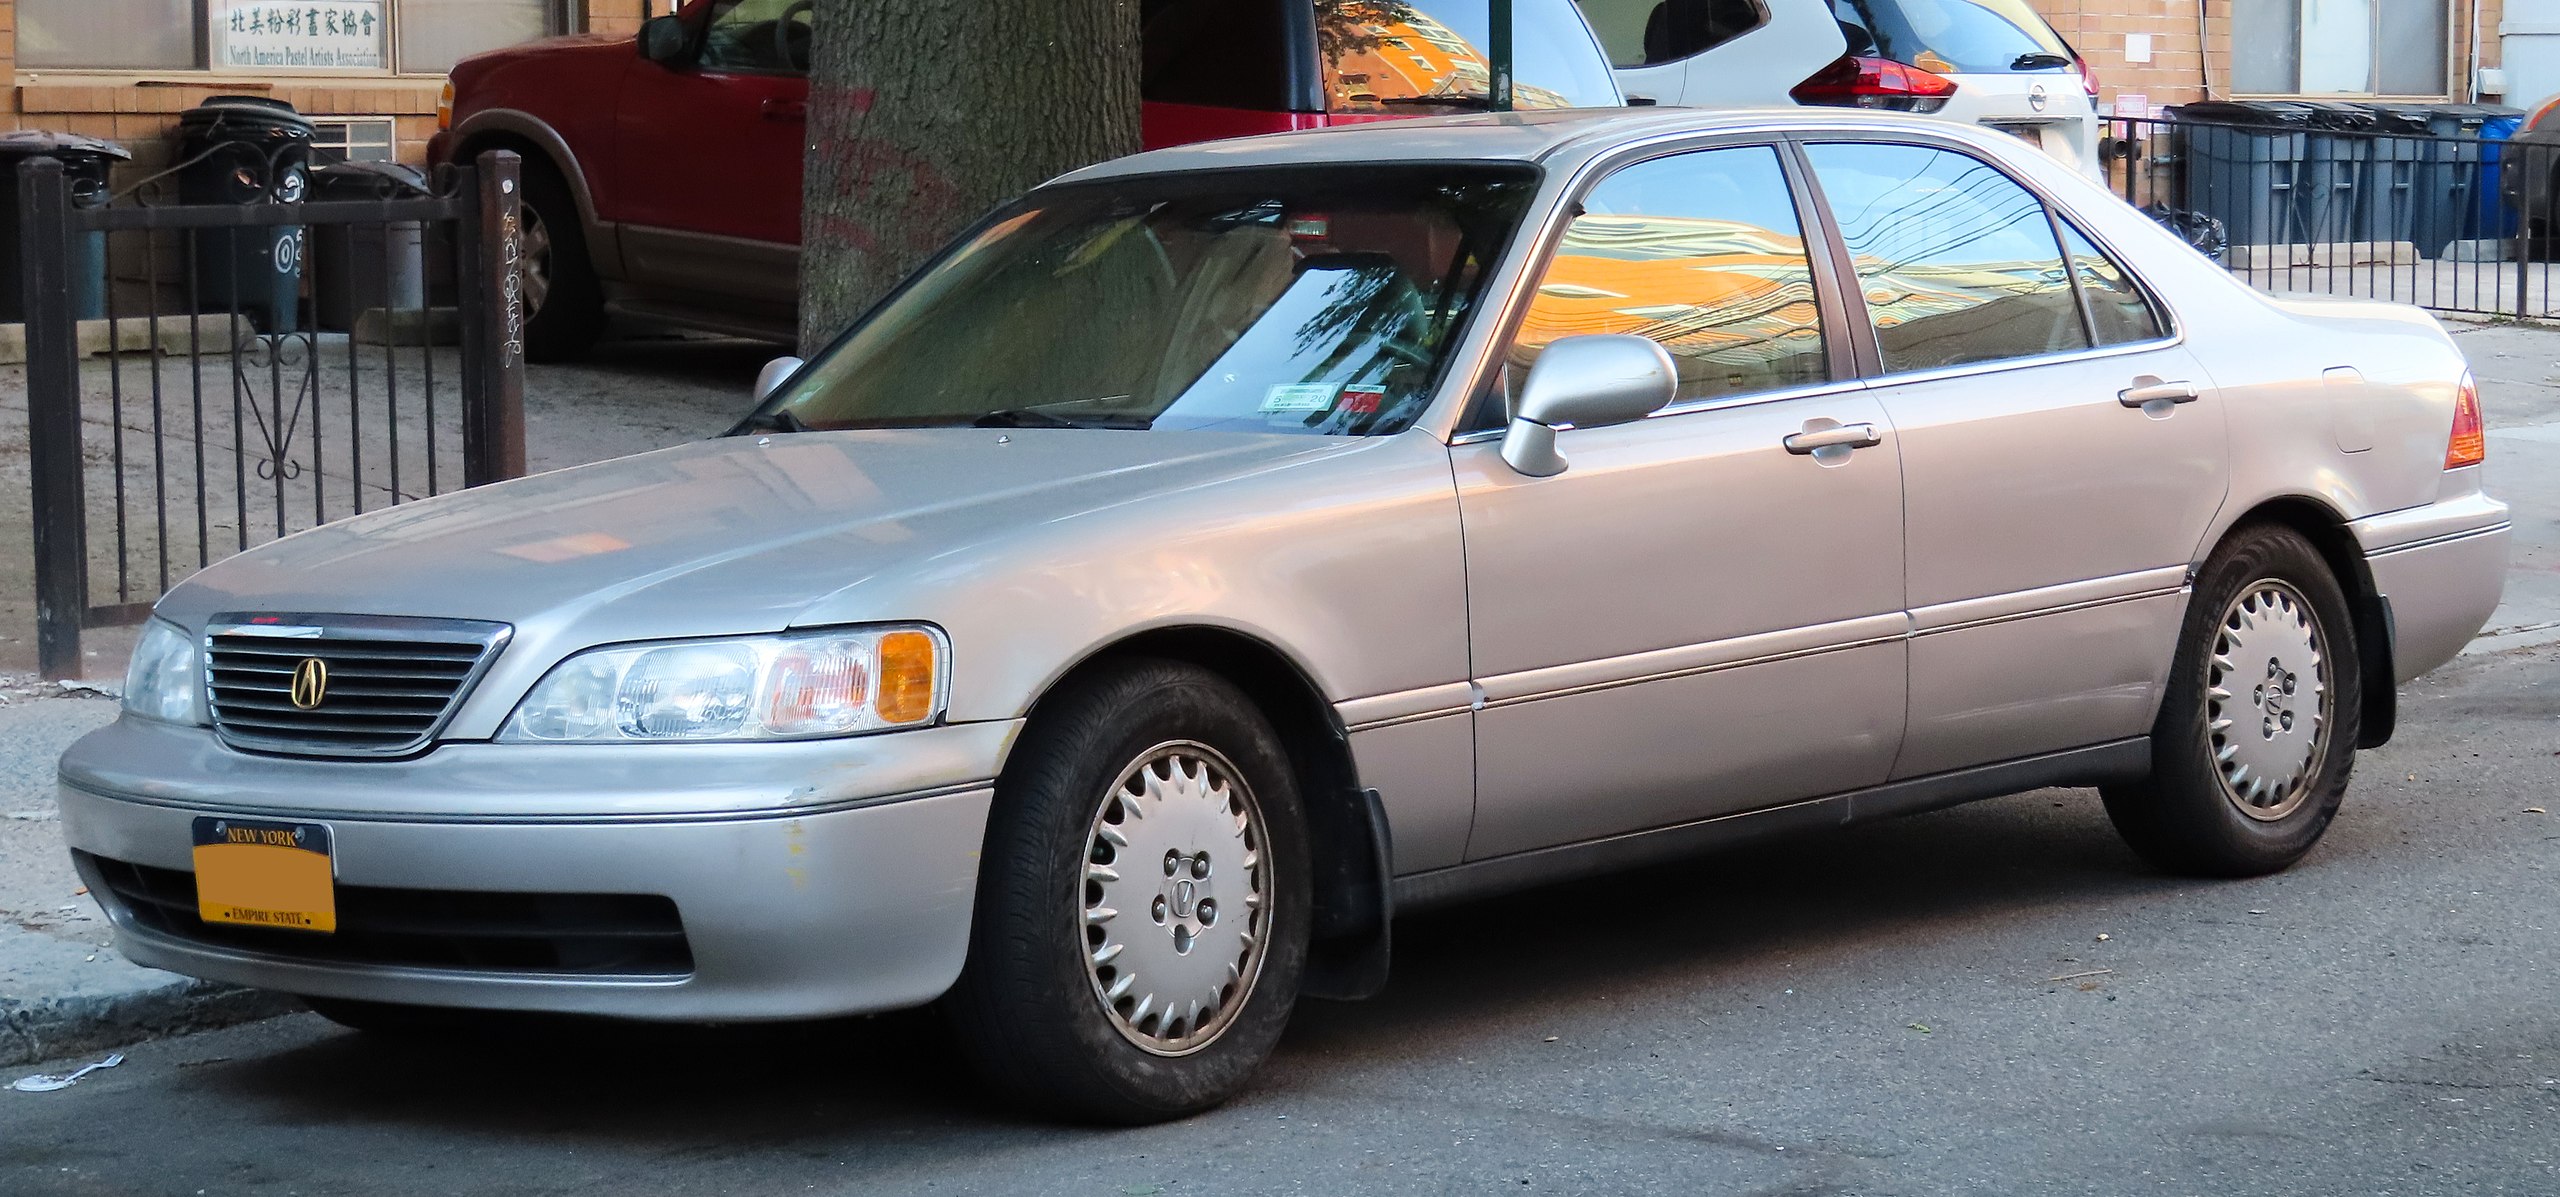 File:1997 Acura RL 3.5 front 5.18.19.jpg - Wikimedia Commons